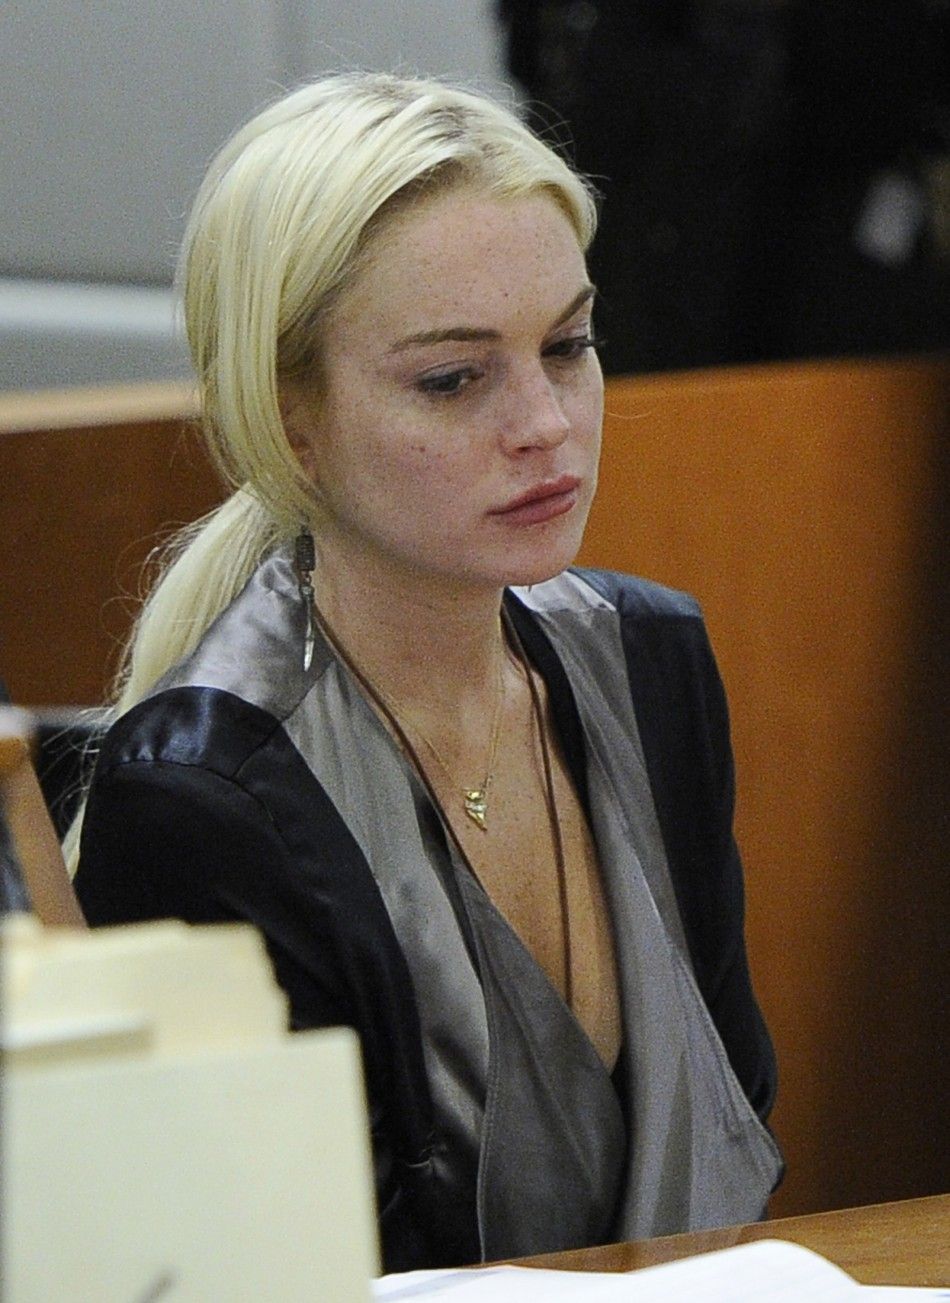 Actress Lindsay Lohan sits in court during a compliance check to report her progress on 480 hours of community service she must do for shoplifting a necklace from a Venice jeweler, in Los Angeles